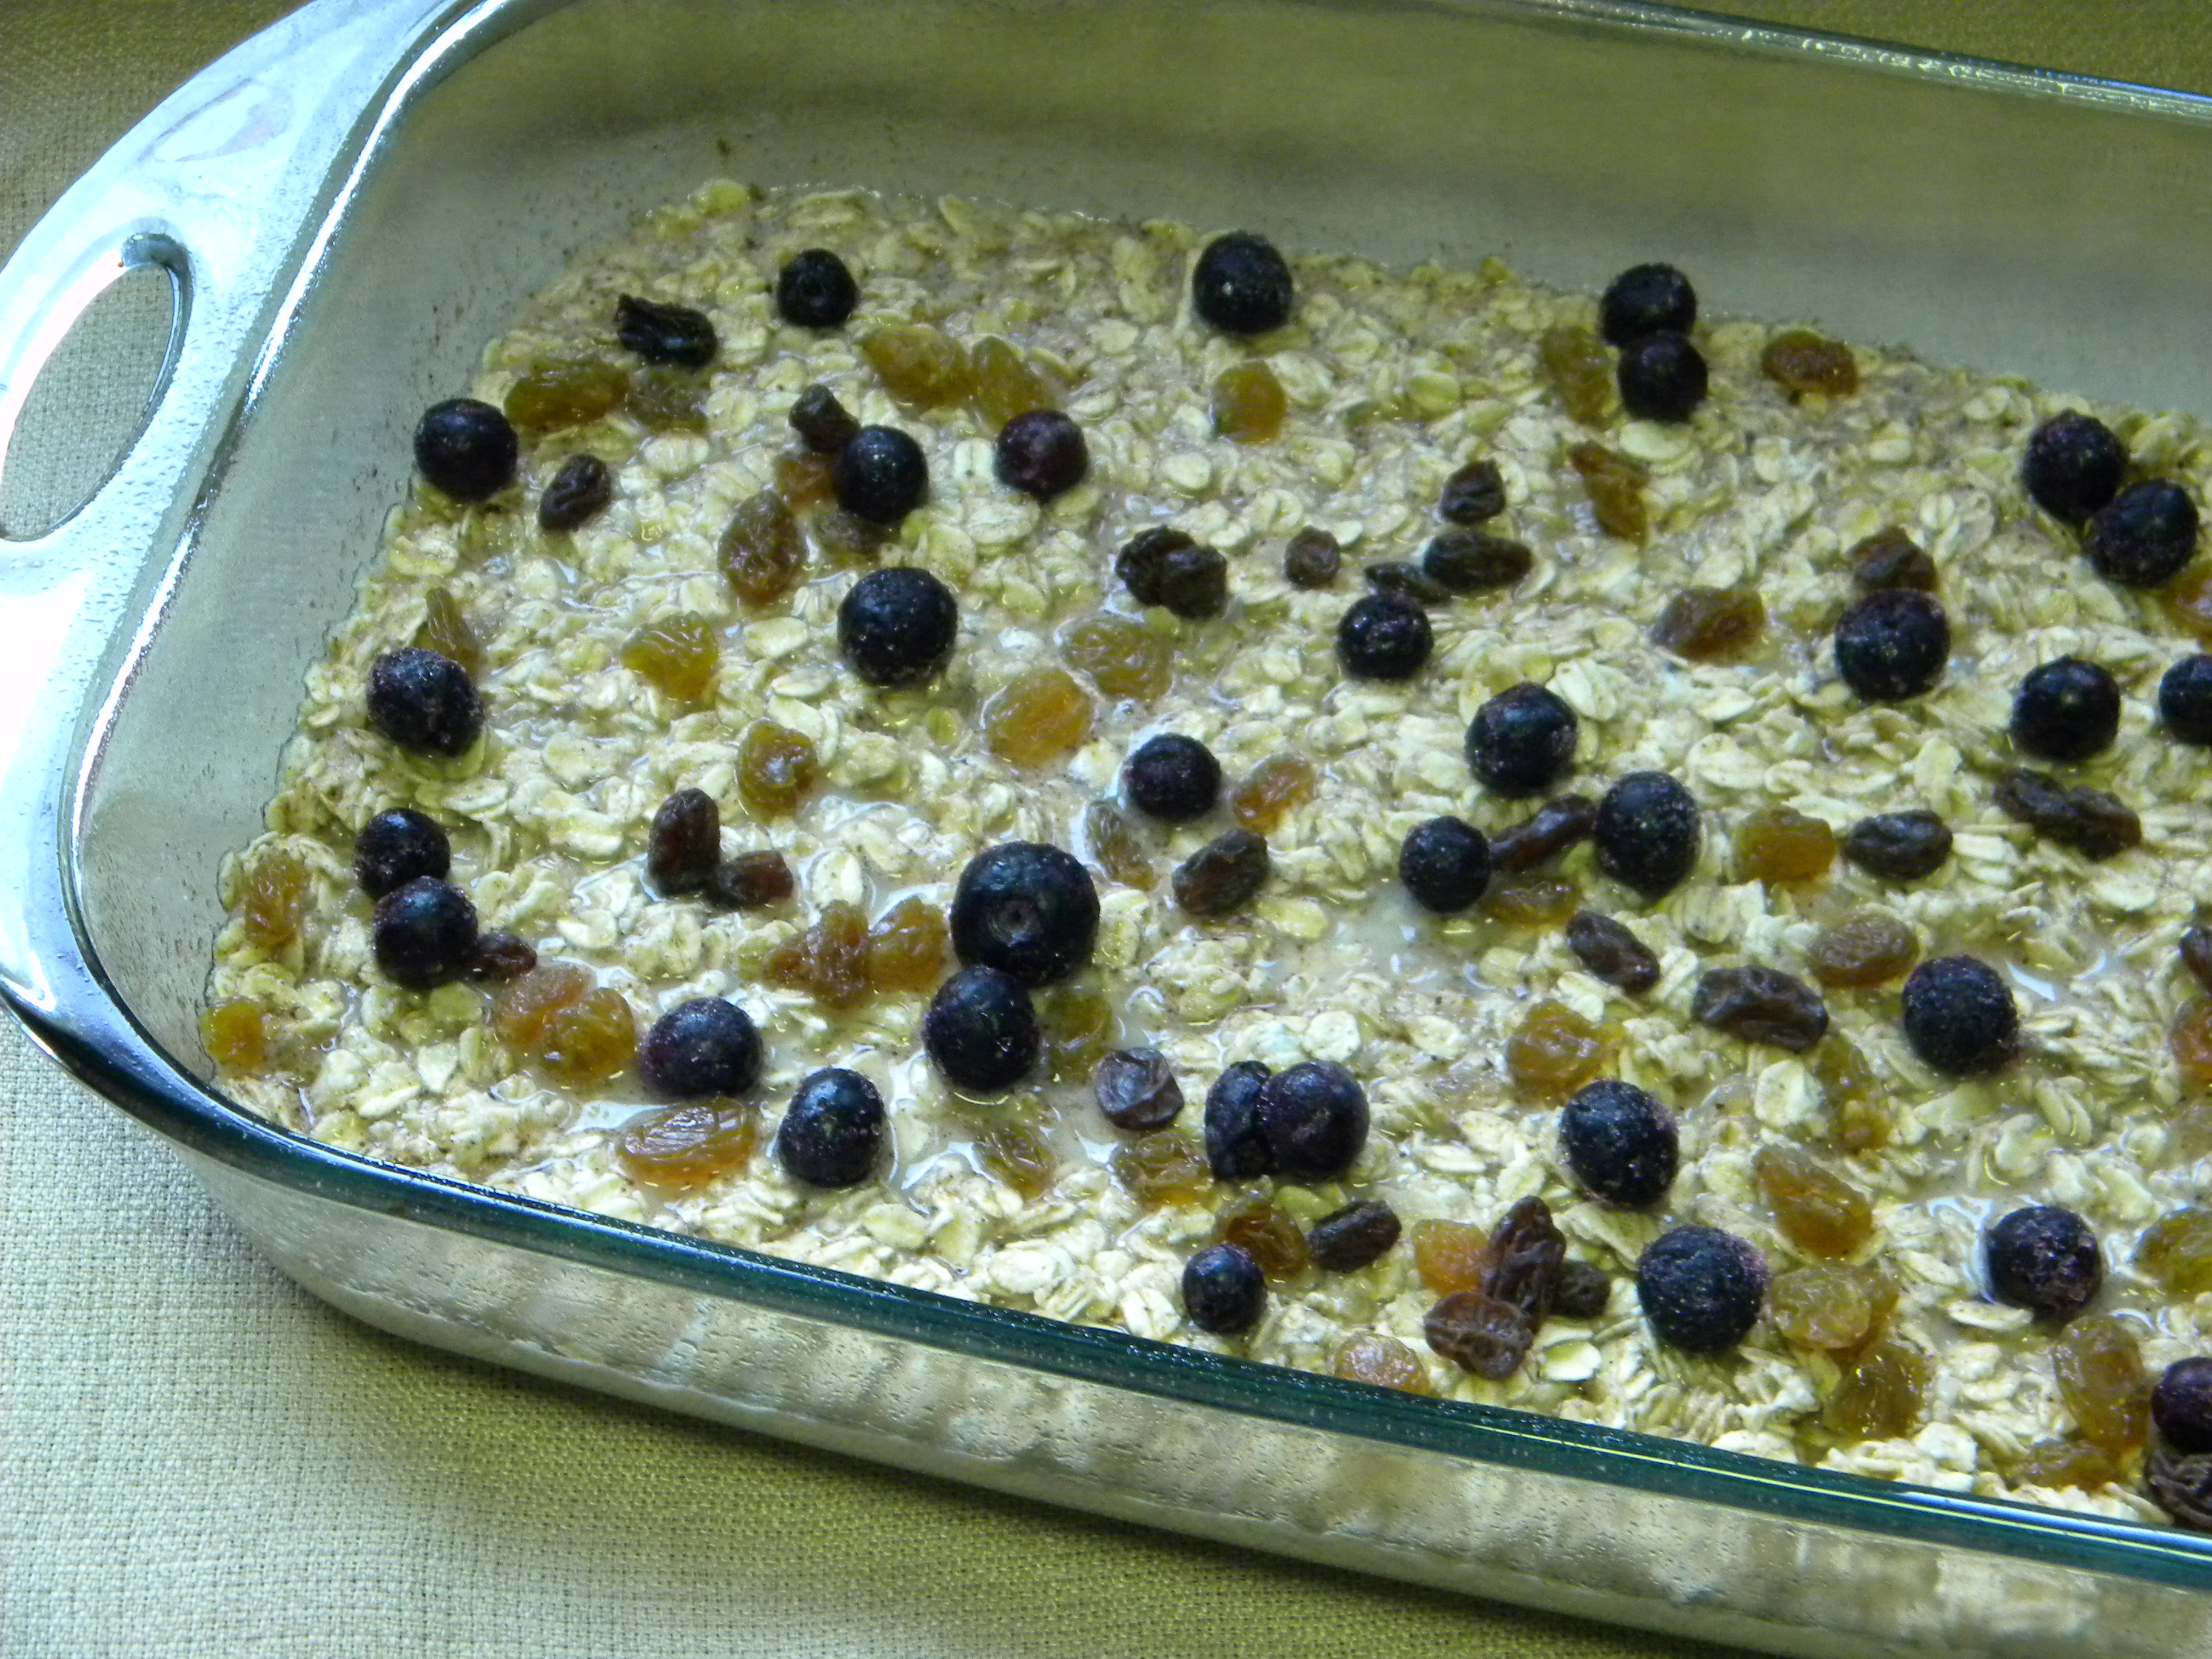 Baked Oatmeal | Dietician, Nutritionist in Plattsburgh, New York | My